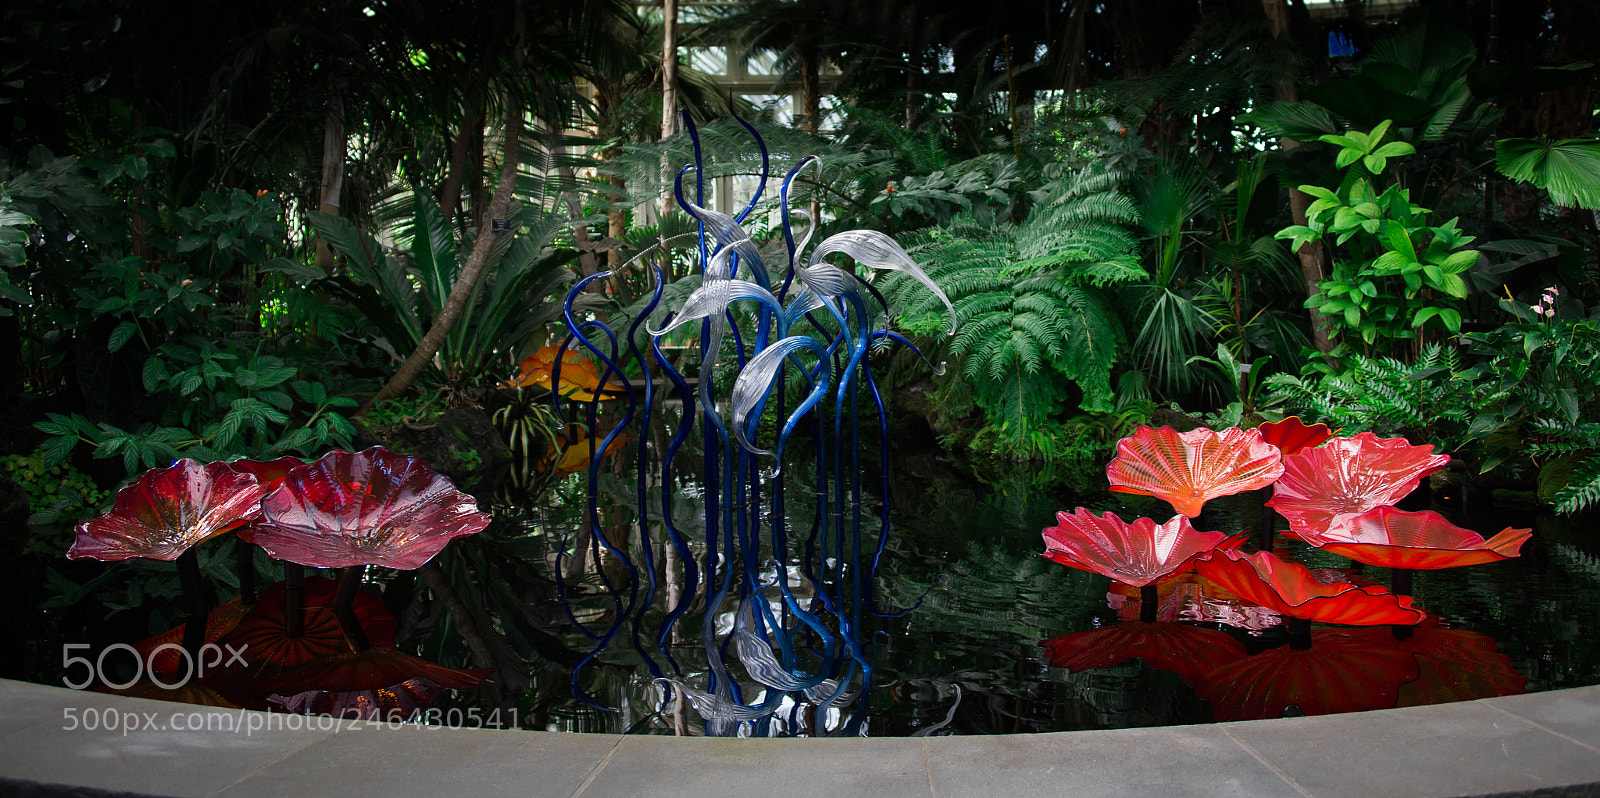 Sony a99 II sample photo. Dale chihuly at the photography